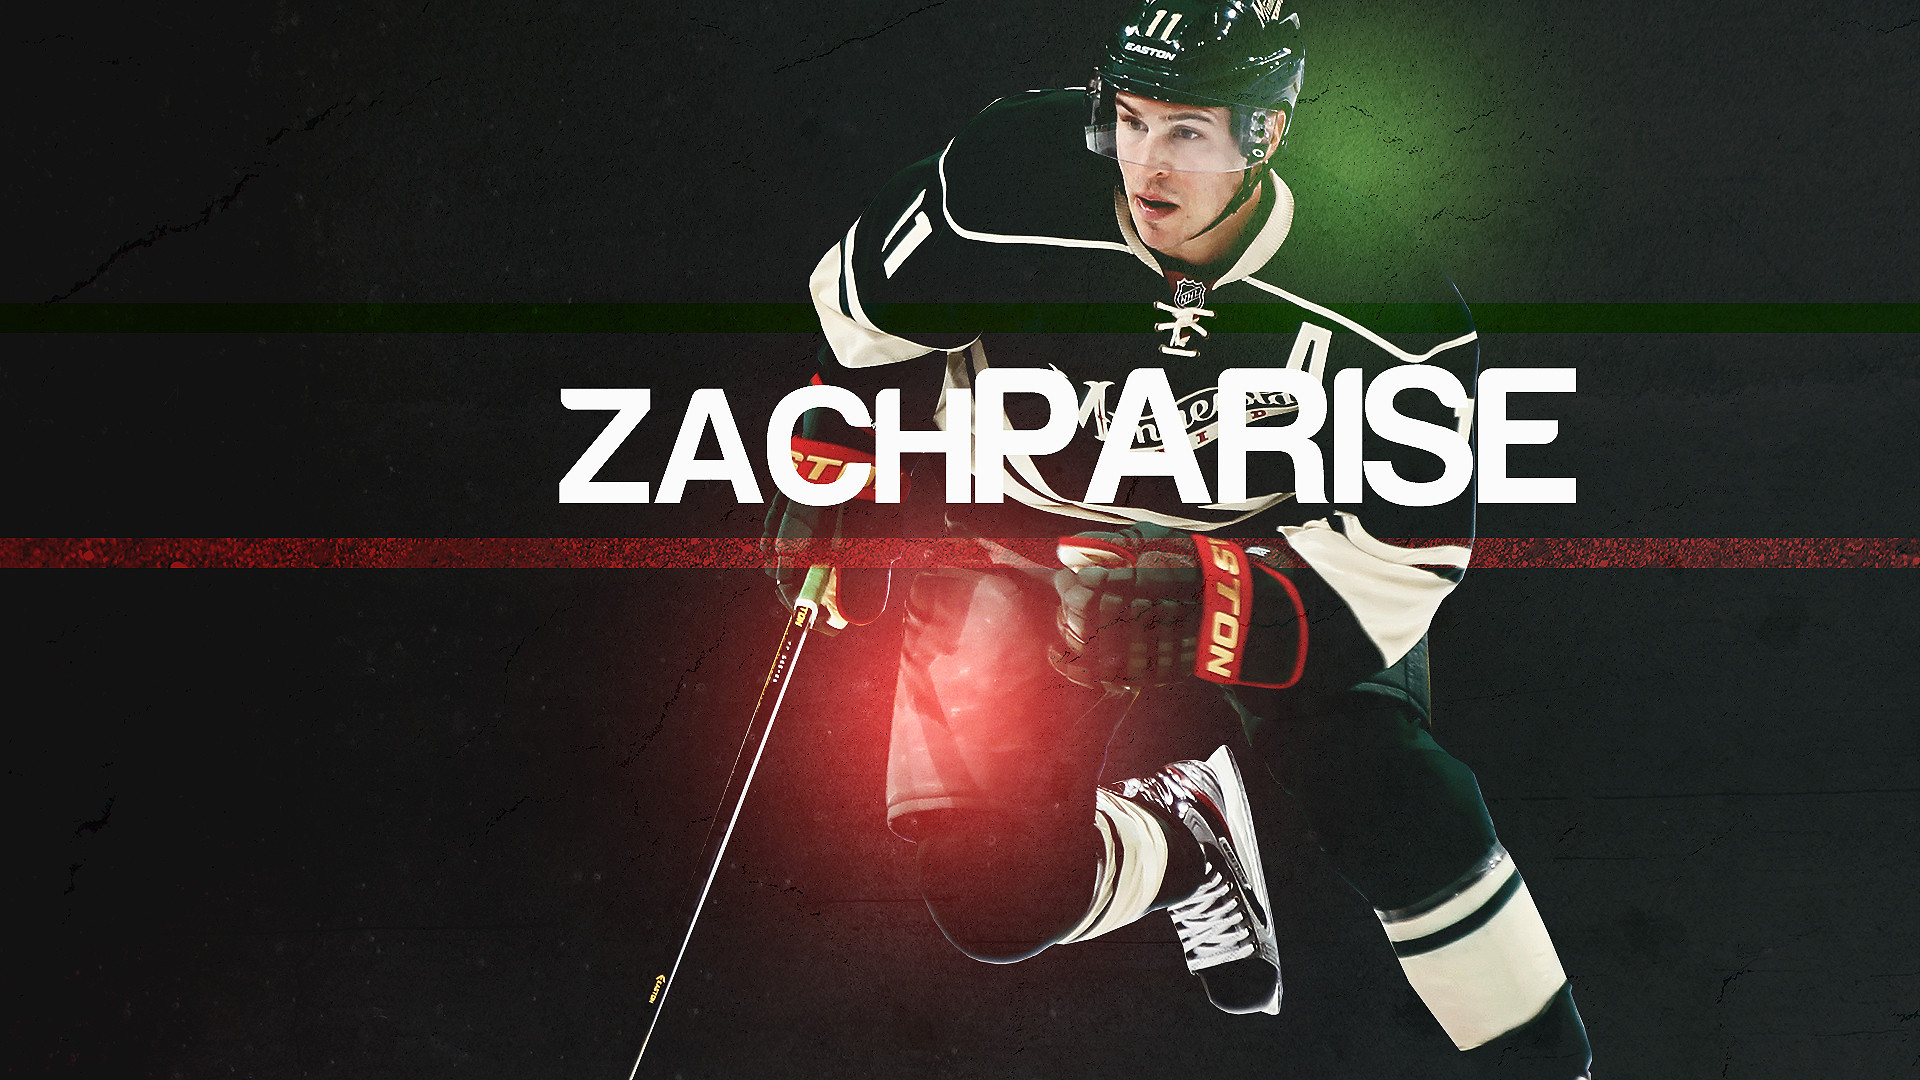 Minnesota Zach Parise wallpapers and images - wallpapers, pictures